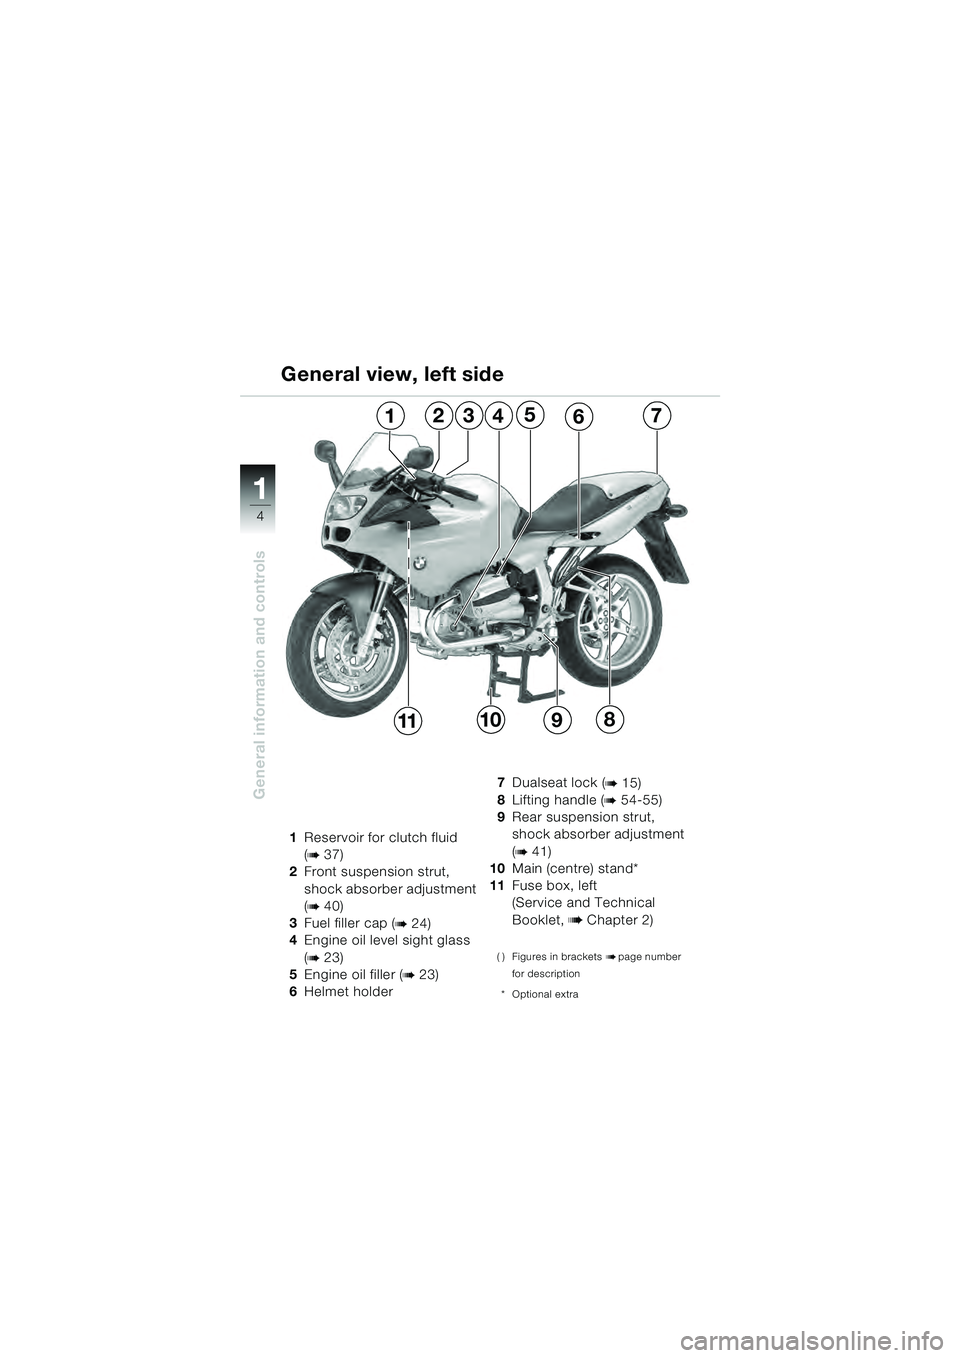 BMW MOTORRAD R 1100 S 2000  Riders Manual (in English) 11
4
General information and controls
1Reservoir for clutch fluid
(
b 37)
2 Front suspension strut, 
shock absorber adjustment 
(
b 40)
3 Fuel filler cap (
b 24)
4 Engine oil level sight glass 
(
b 23